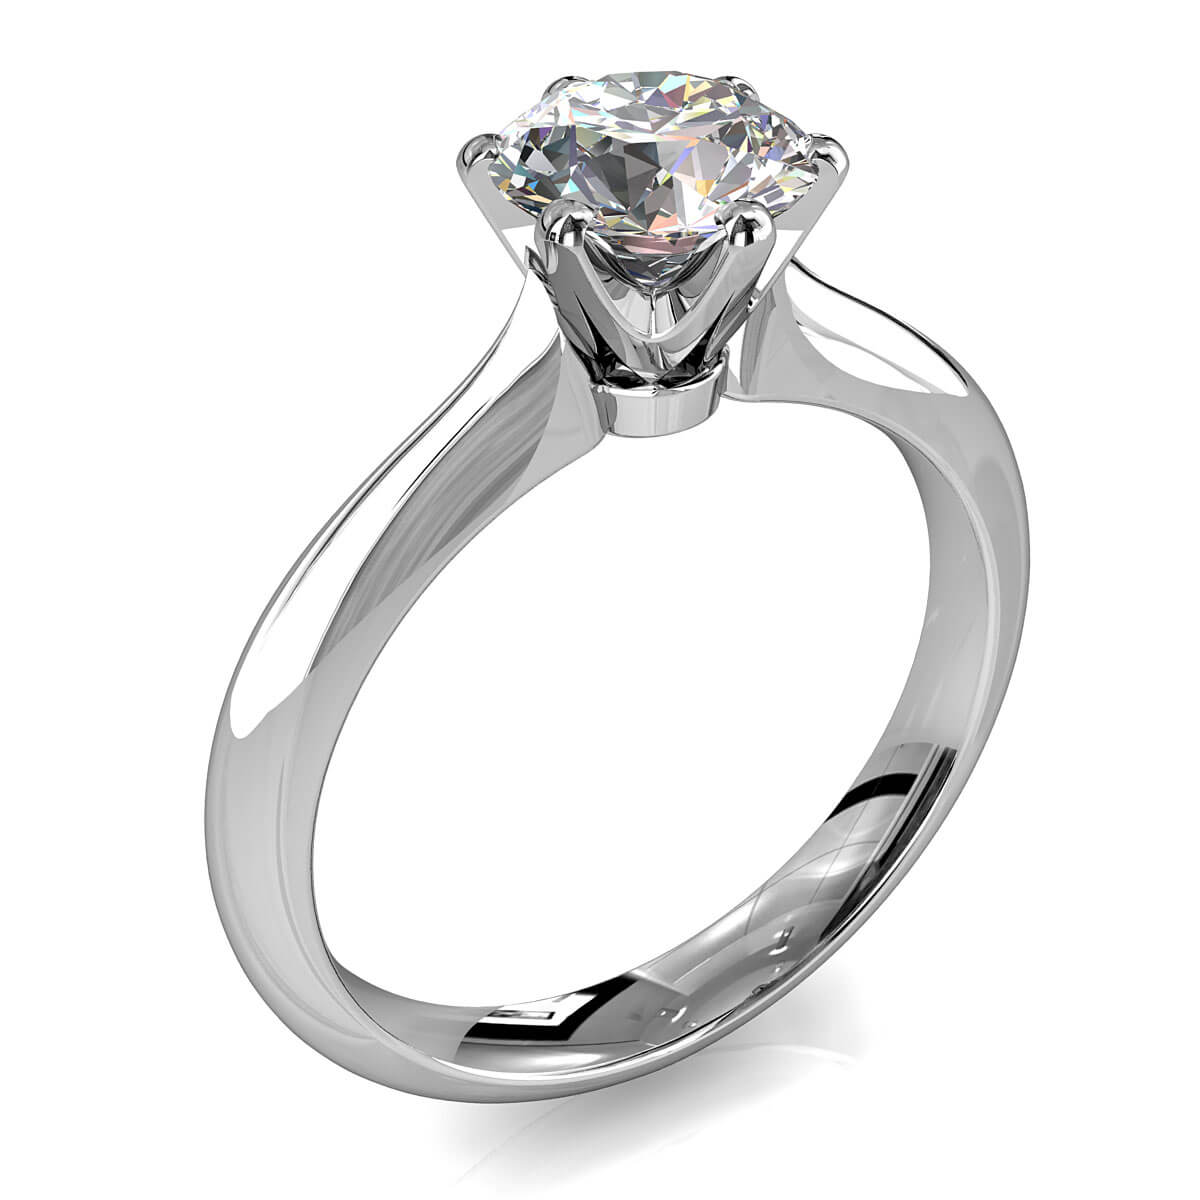 Round Brilliant Cut Solitaire Diamond Engagement Ring, 6 Button Claws Set on Tapered Knife Edge Rounded Band with Crown Undersetting.